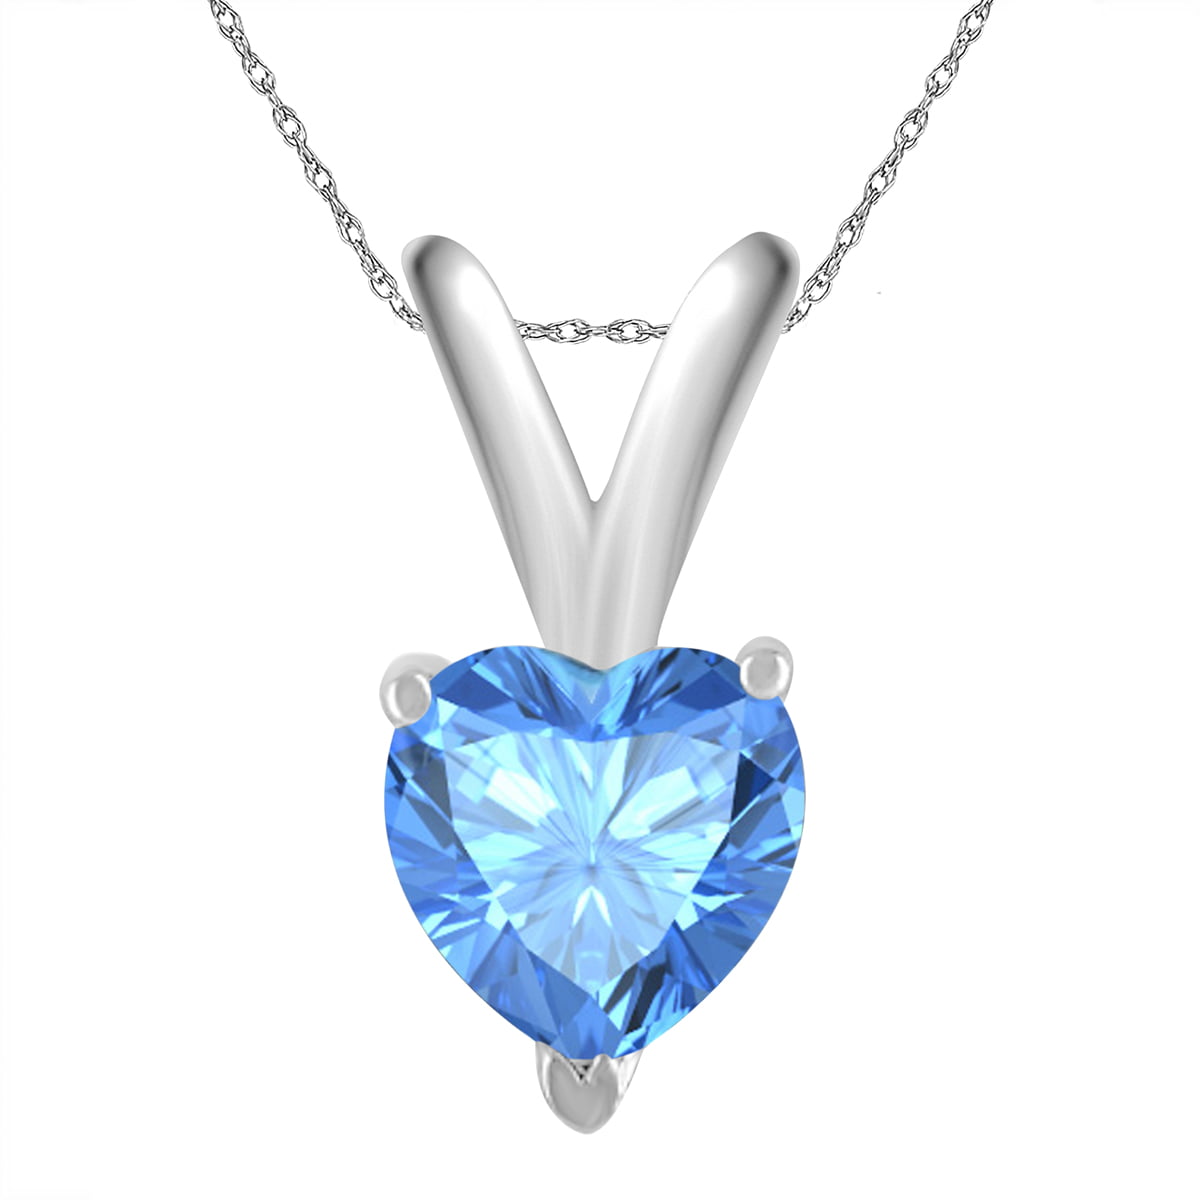 Platinum Plated 925 Sterling Silver Oval Blue Sky Topaz Garnet Pendant Wedding Jewelry for Women Gift Ct 5.6